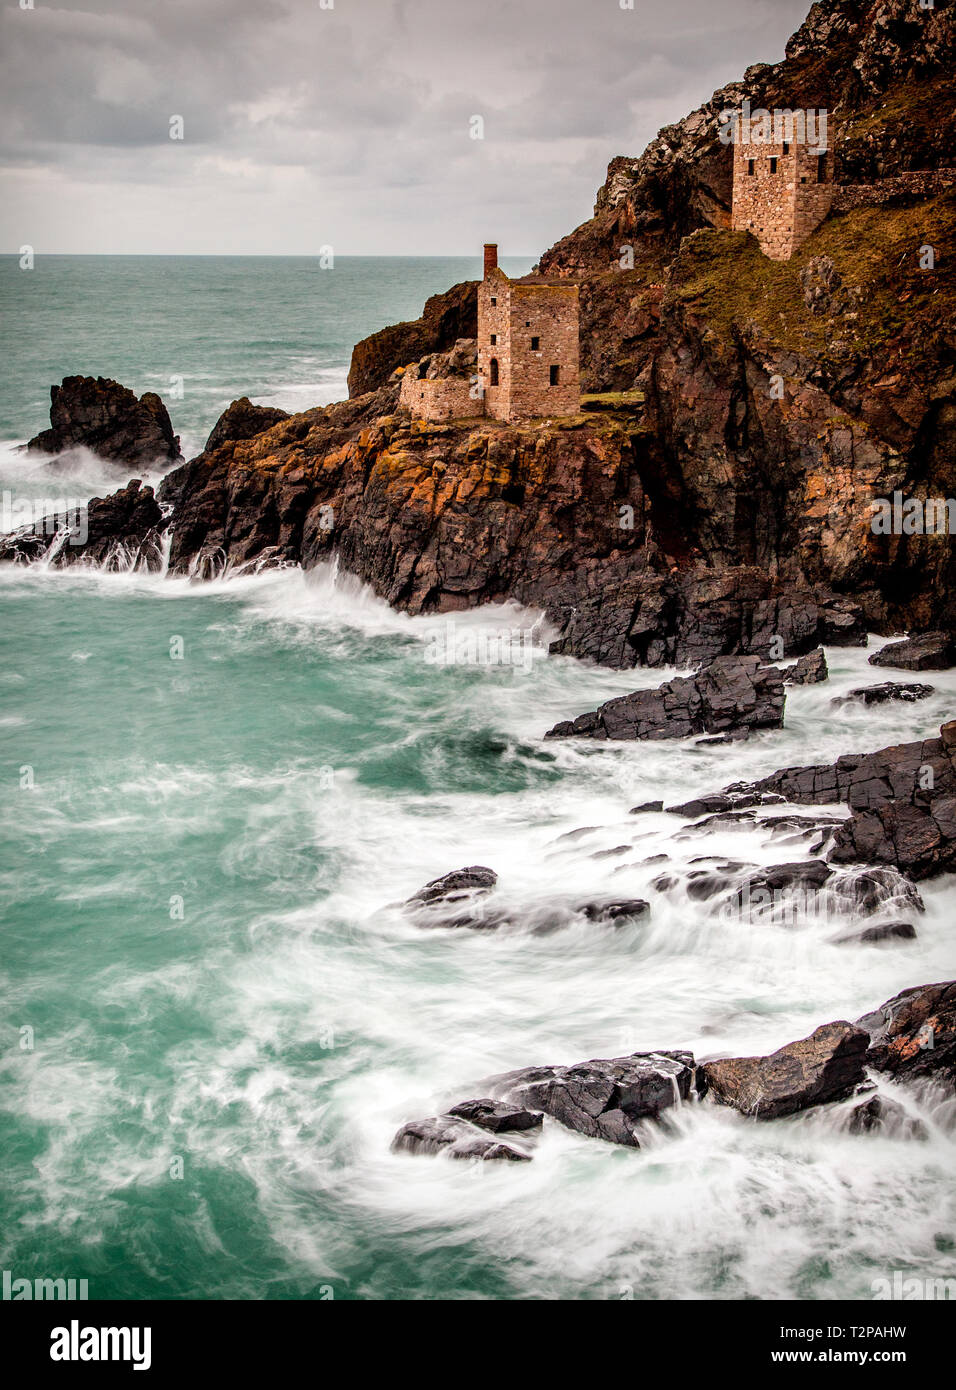 The Crown mine at Botallack on the Southern tip of Cornwall lye in this epic composition hugging the rugged coastline, Stock Photo